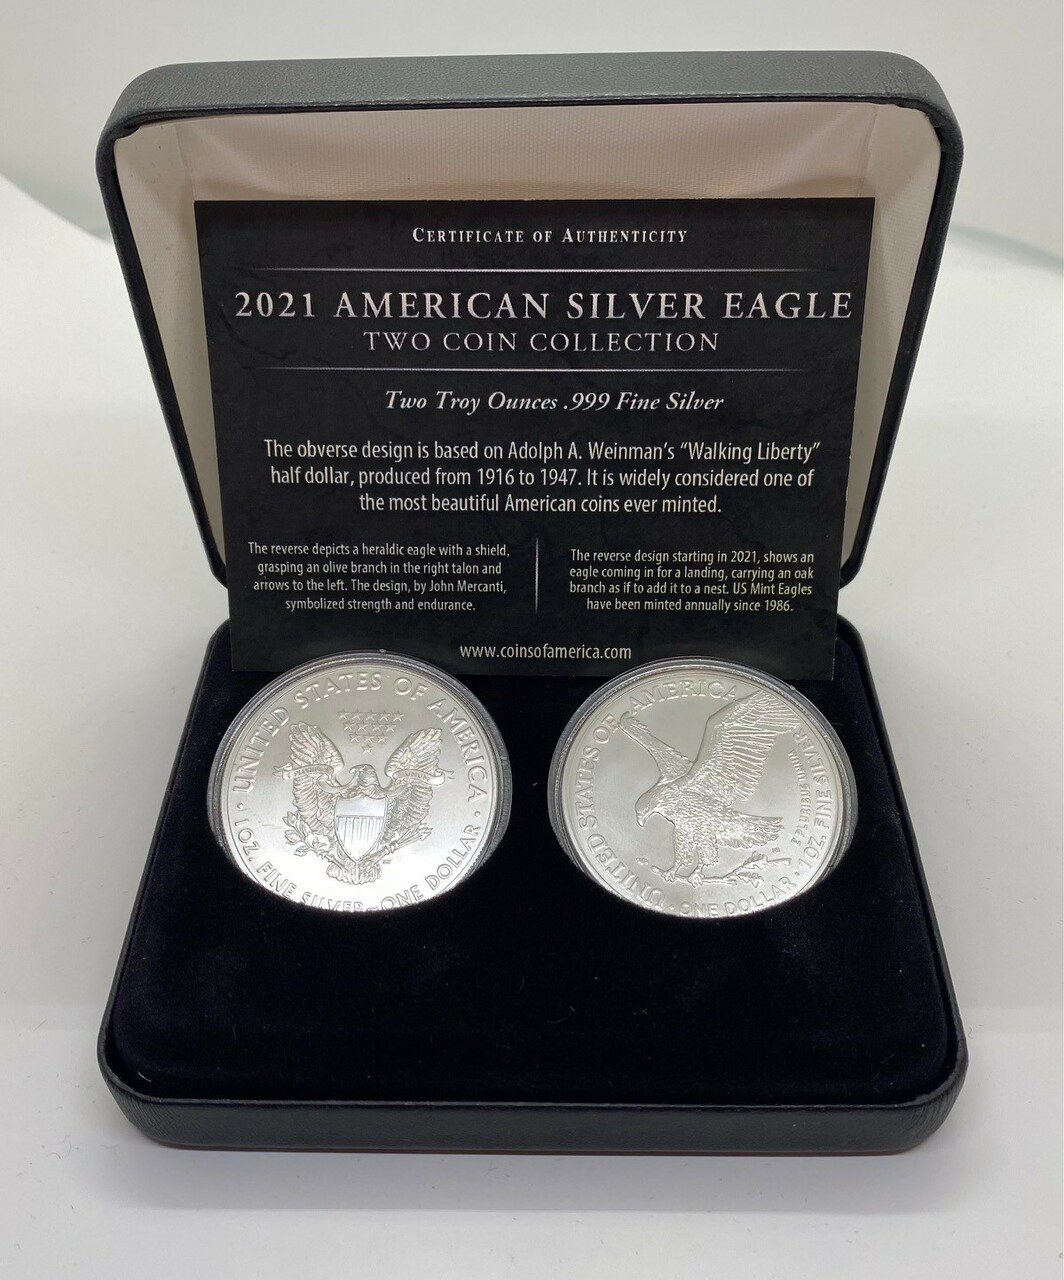 2021 American Silver Eagle 2 Piece Collection Type 1 & Type 2 Reverse Designs in a Custom Display Case